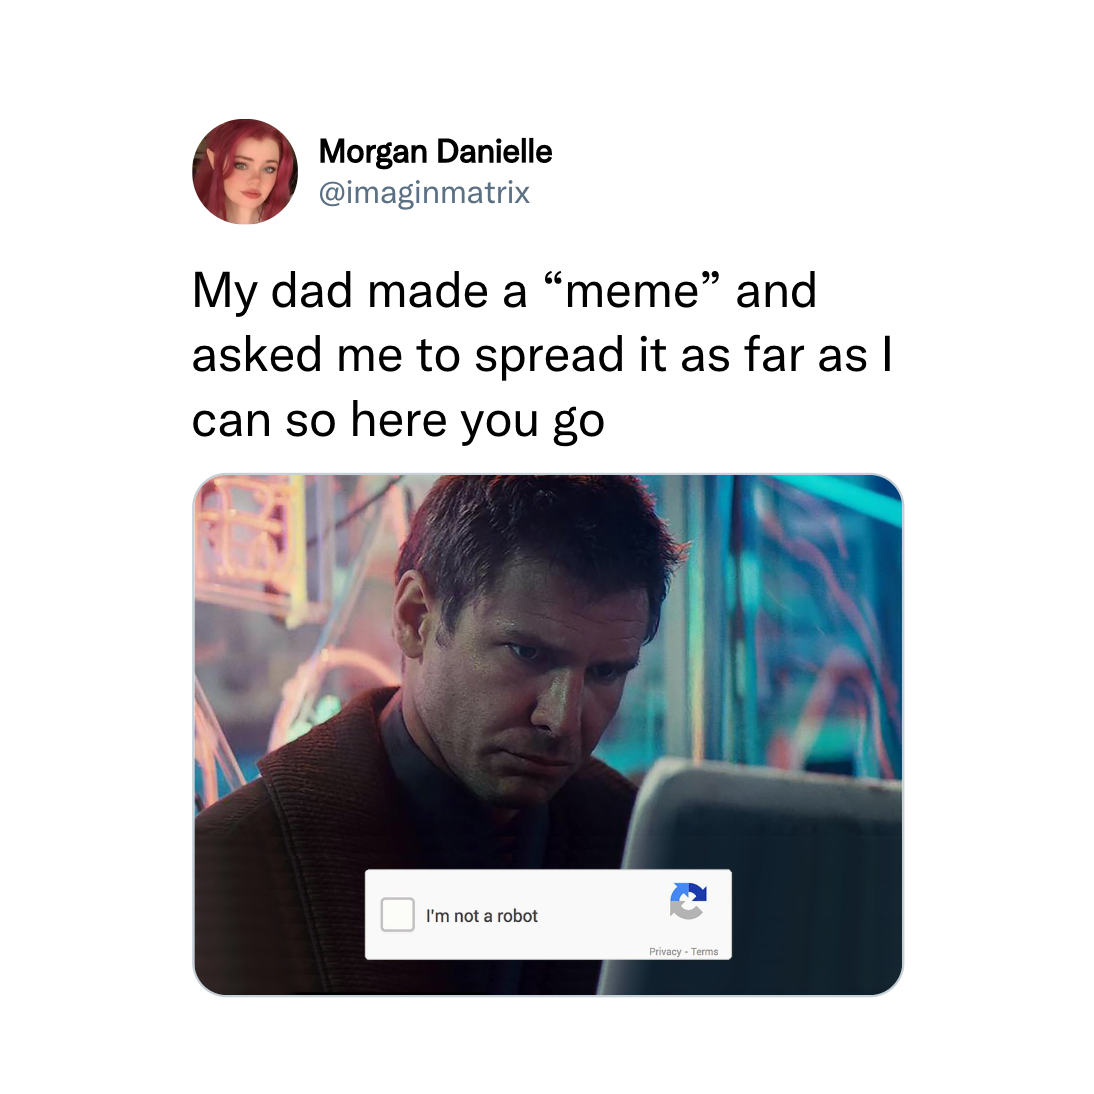 funny tweets - harrison ford blade runner - Morgan Danielle My dad made a meme and asked me to spread it as far as I can so here you go I'm not a robot Privacy Terms